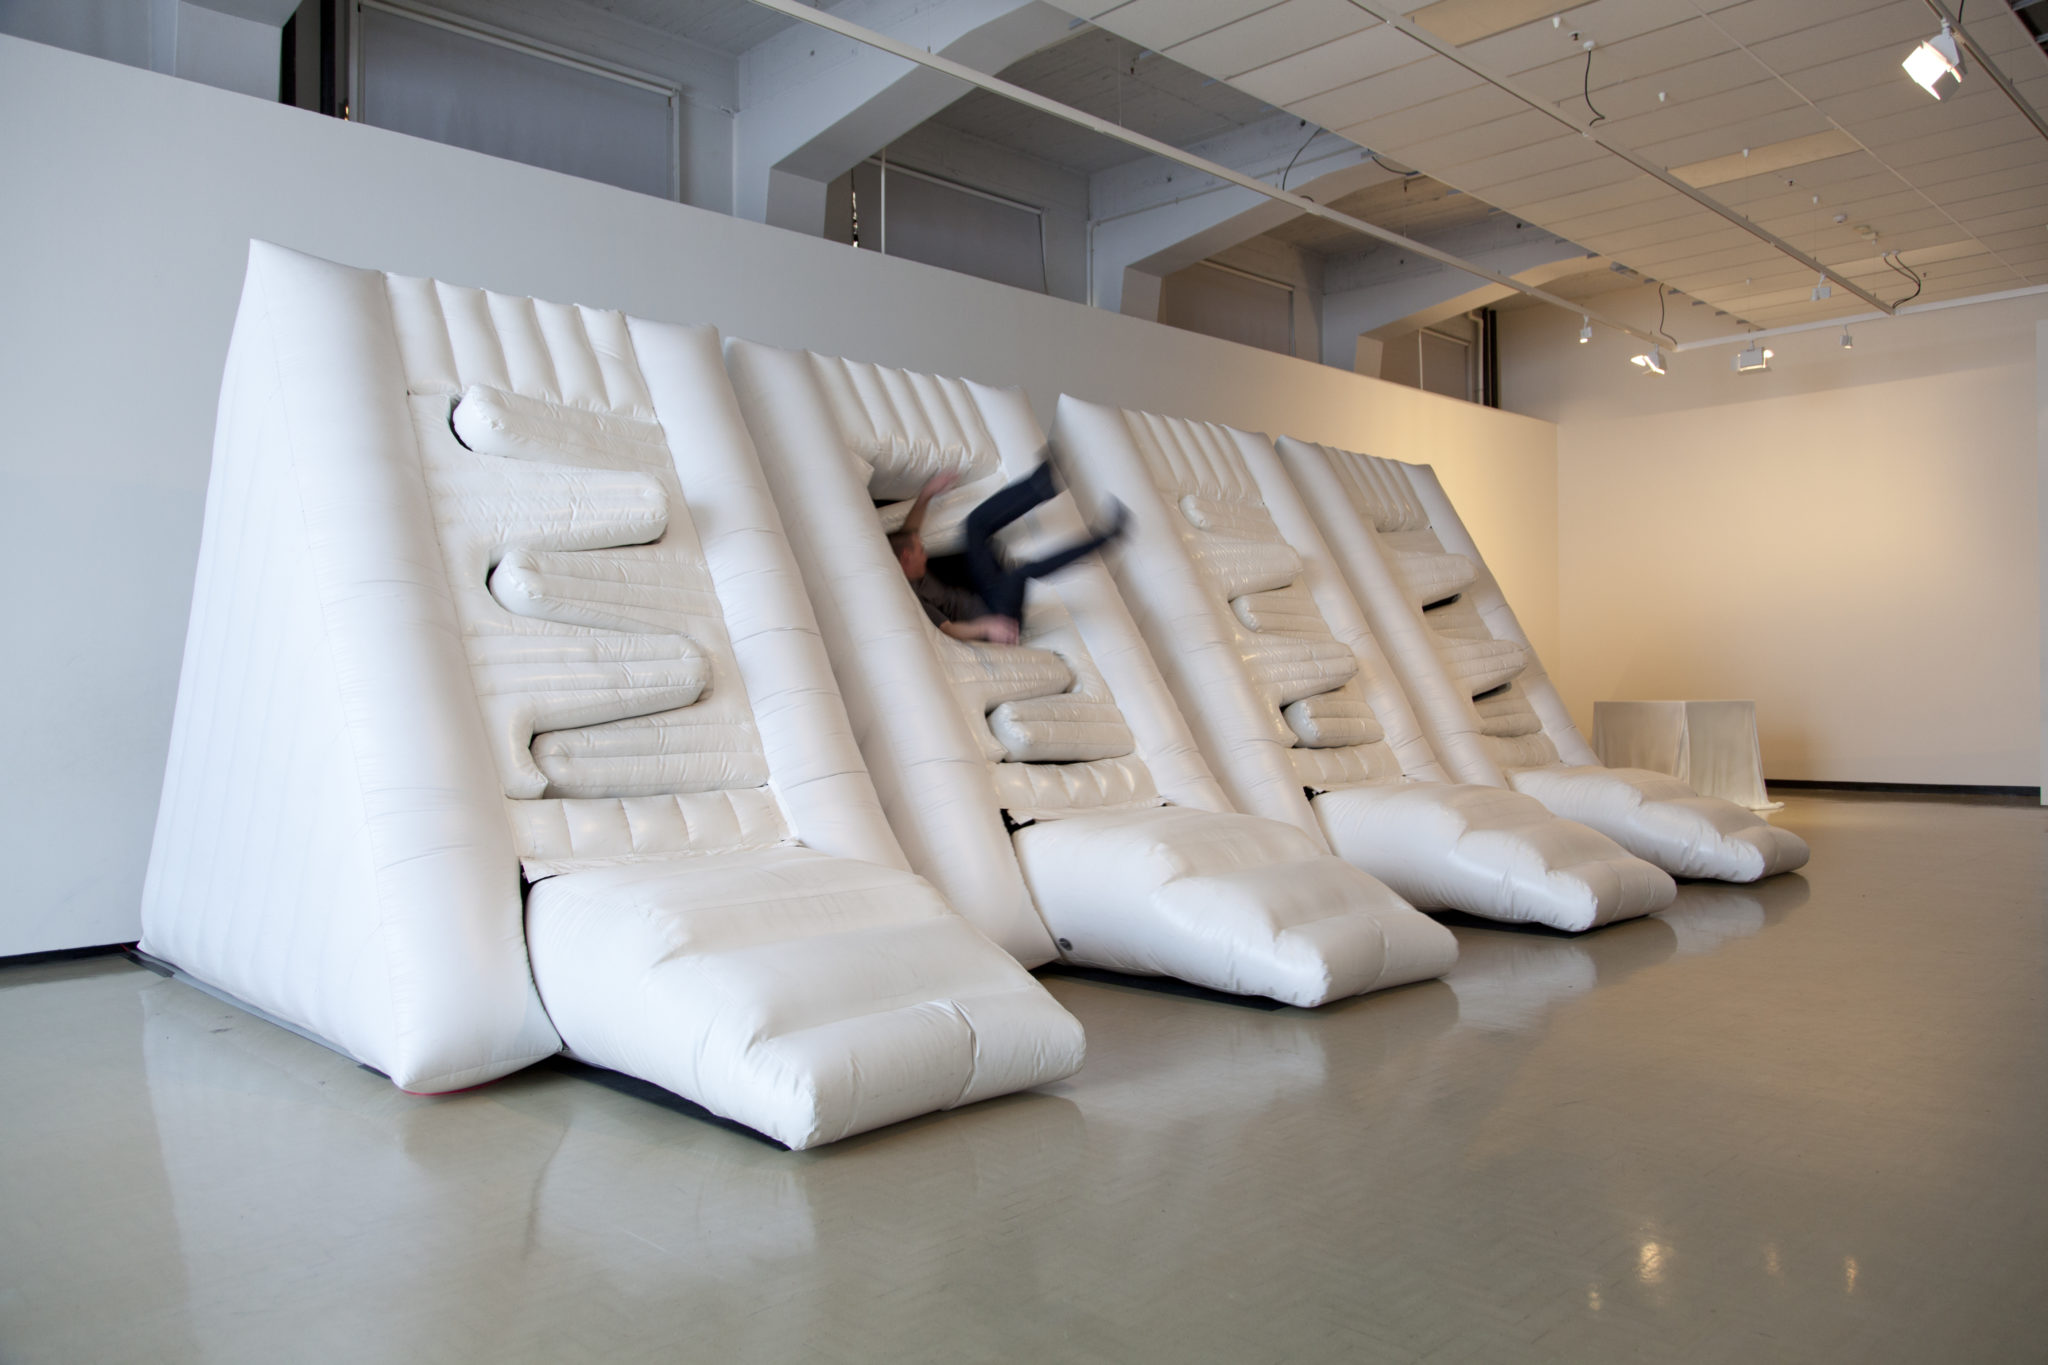 David Cross, Lean, 2011, Inflatable installation, Courtesy the artist.